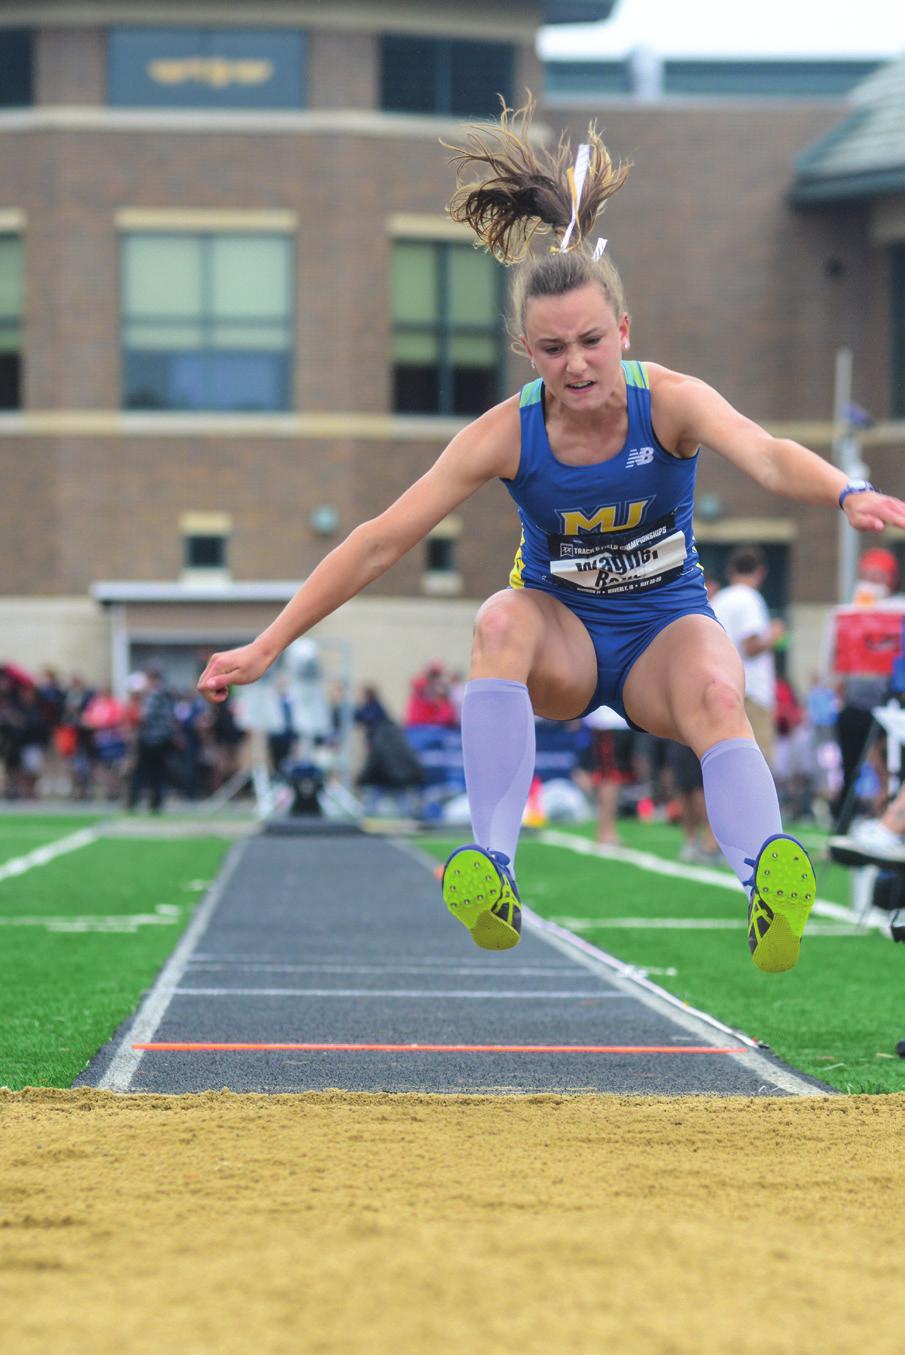 MEN S AND WOMEN S TRACK AND FIELD The Misericordia University track & field teams continued to enjoy success on the national level in 2017.